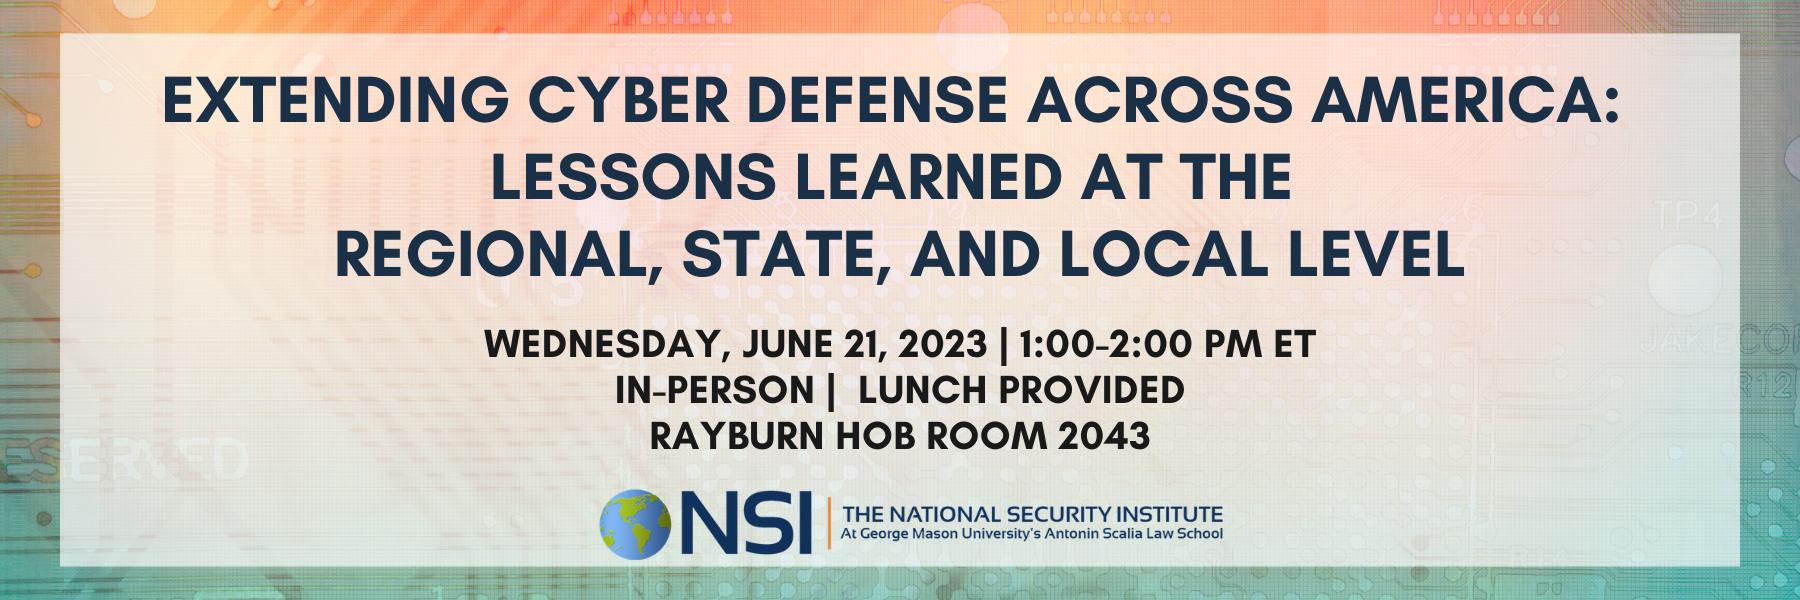 Extending Cyber Defense Across America: Lessons Learned from 'Shields Up' at the Regional, State, and Local Level